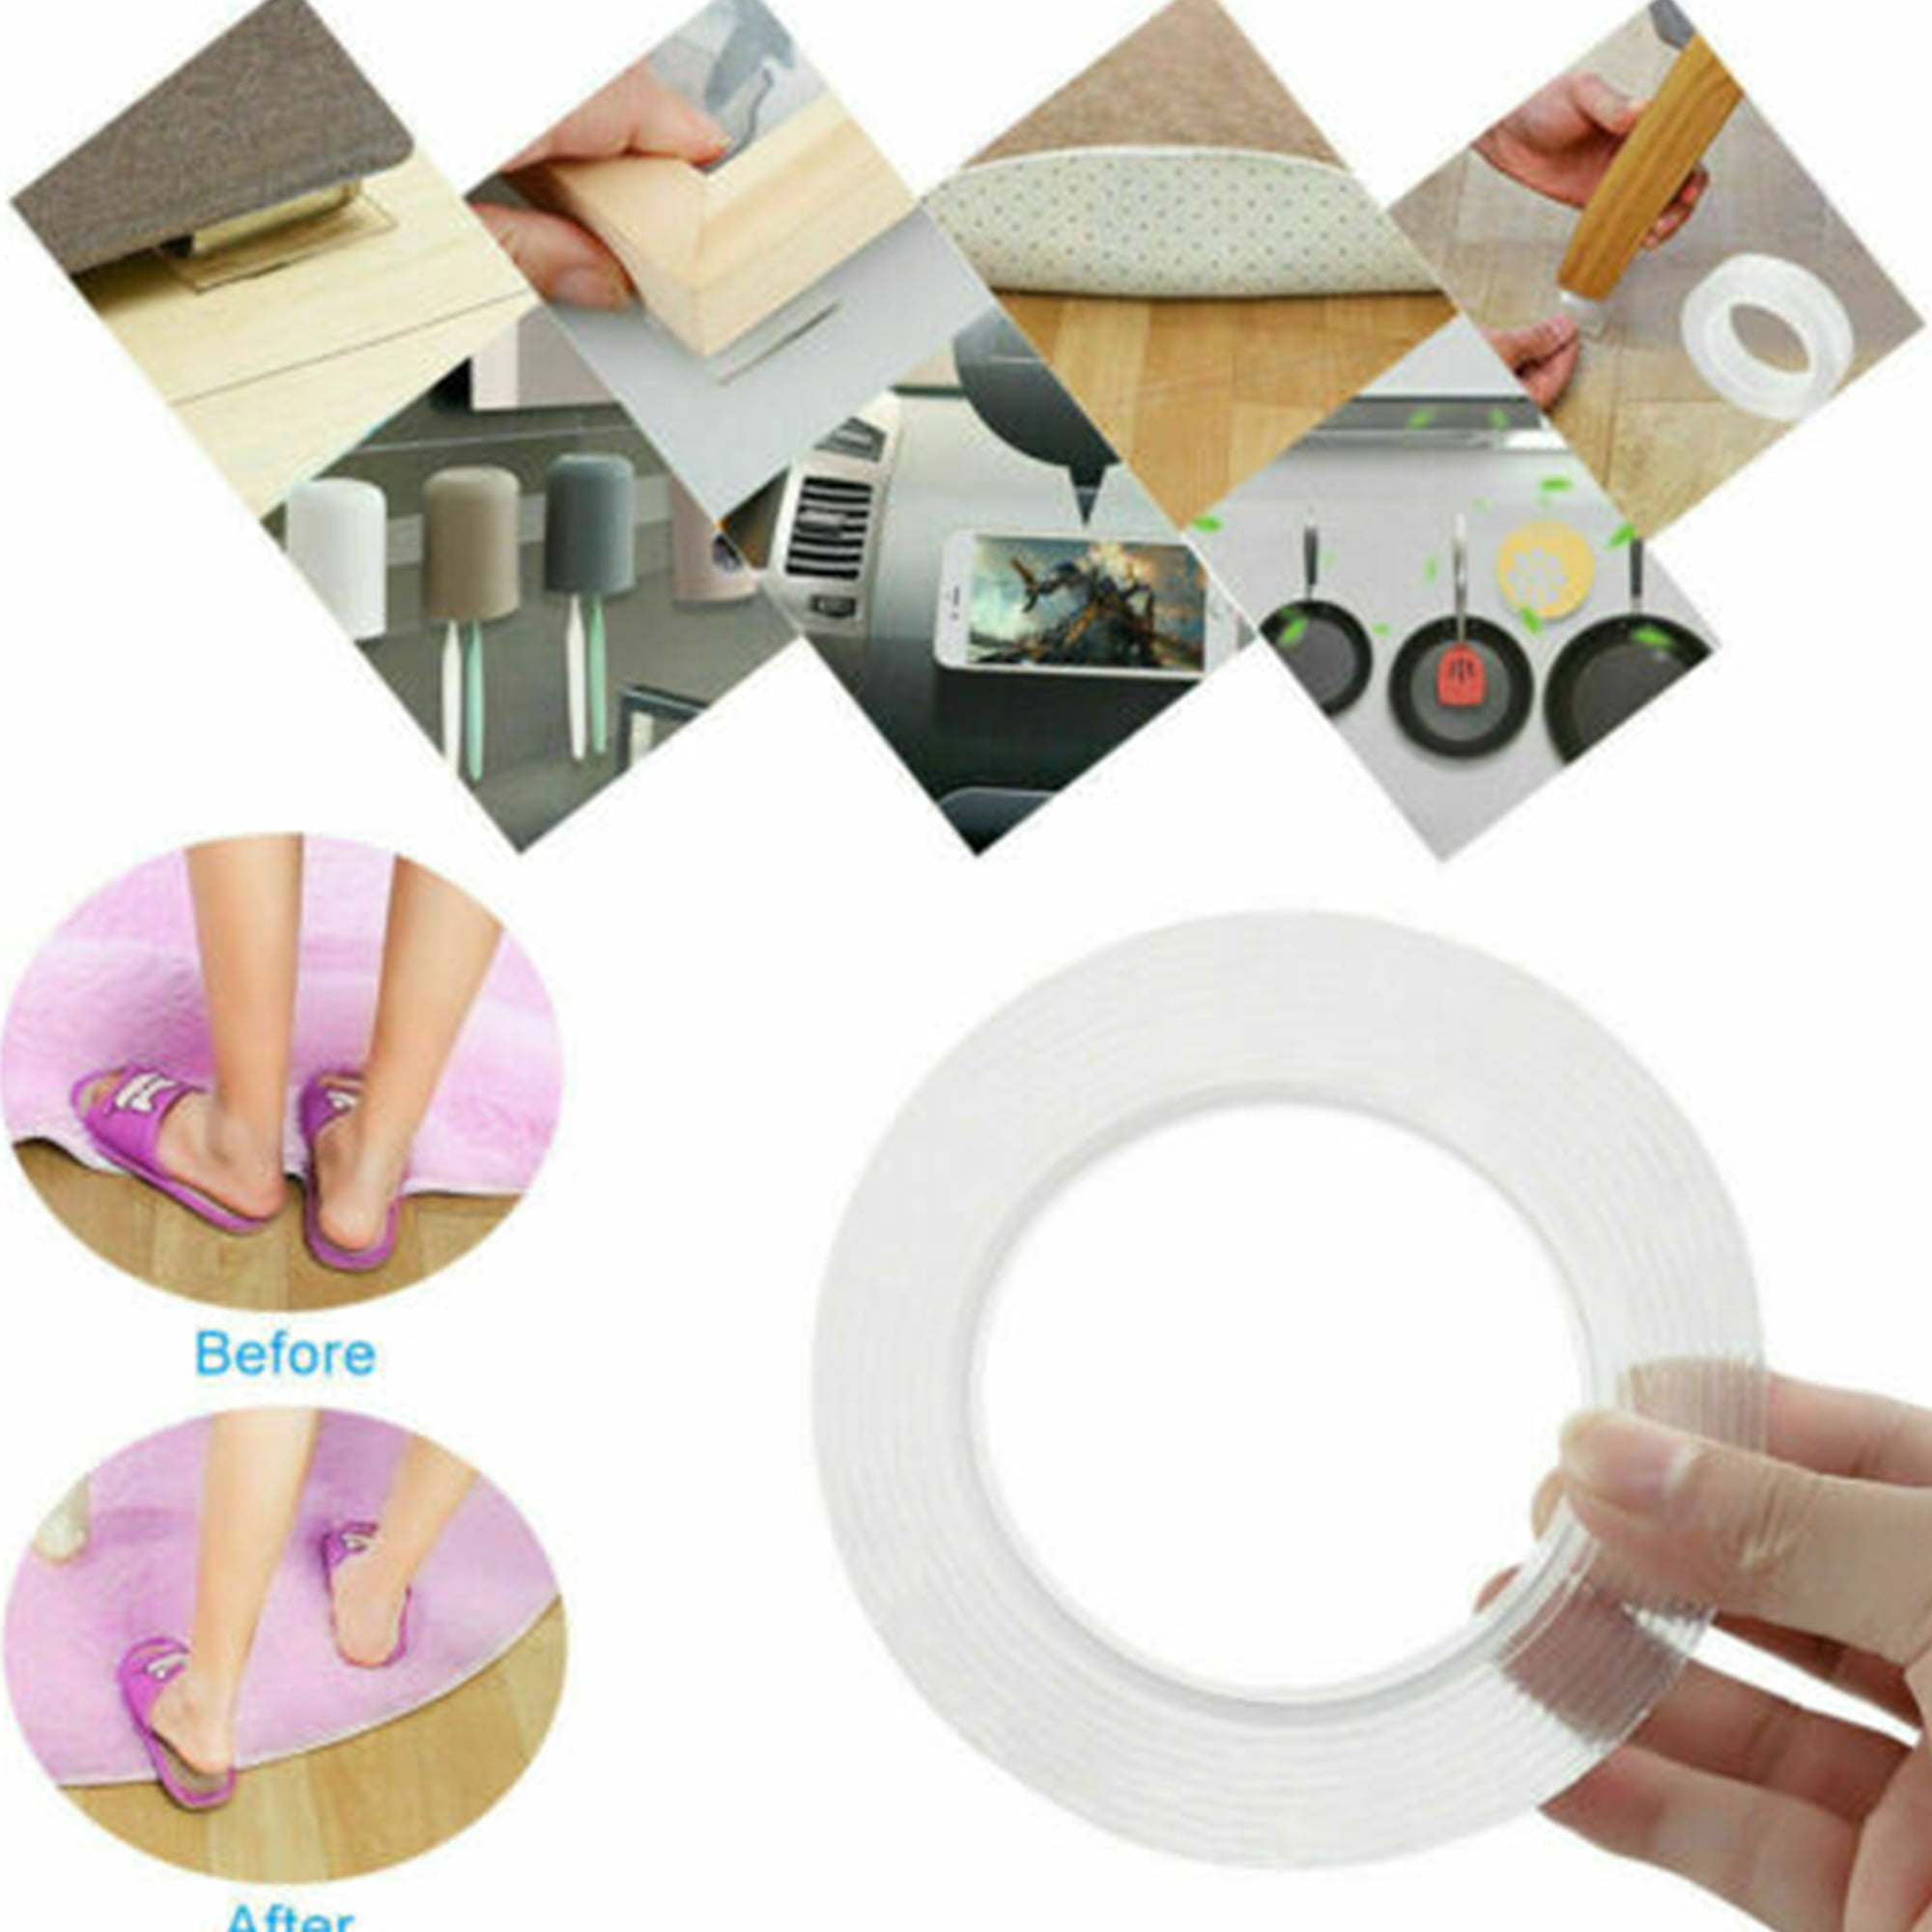  OUSIKA Double Sided Tape 2CM/3CM Width Nano Magic Tape Double  Sided Adhesive Tape Reusable Washable Nano Tape No Trace (Color :  Trasperant, Size : 1M-1.1MM-20MM) : Office Products